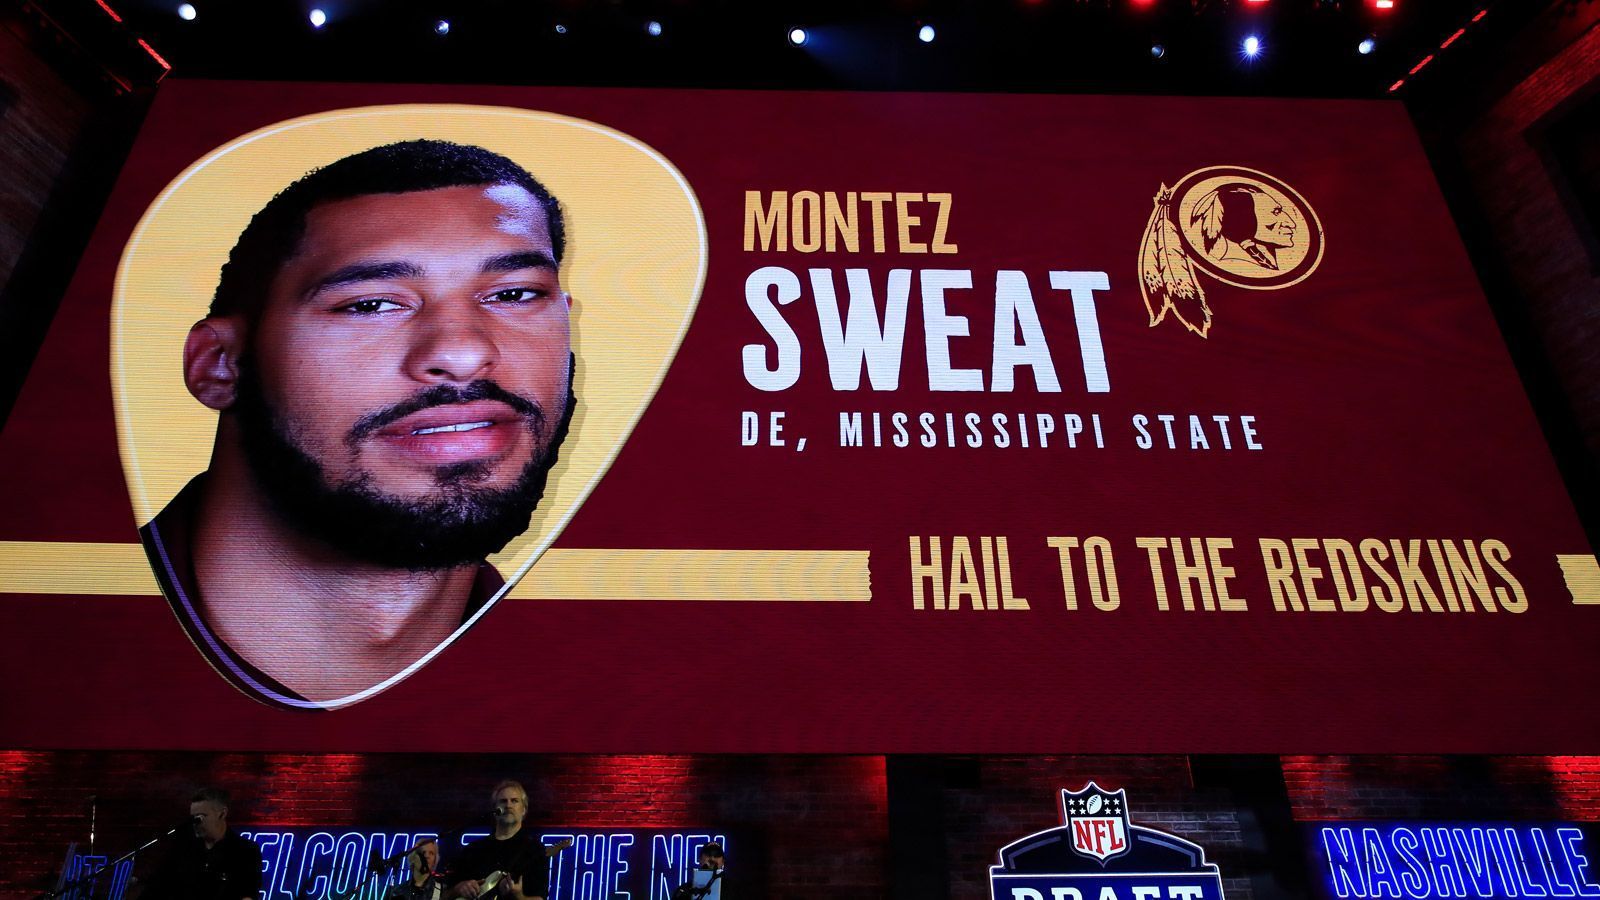 
                <strong>Draft Pick 26: Washington Redskins (durch Trade mit Indianapolis Colts)</strong><br>
                Spieler: Montez SweatPosition: LinebackerCollege: Mississippi State
              